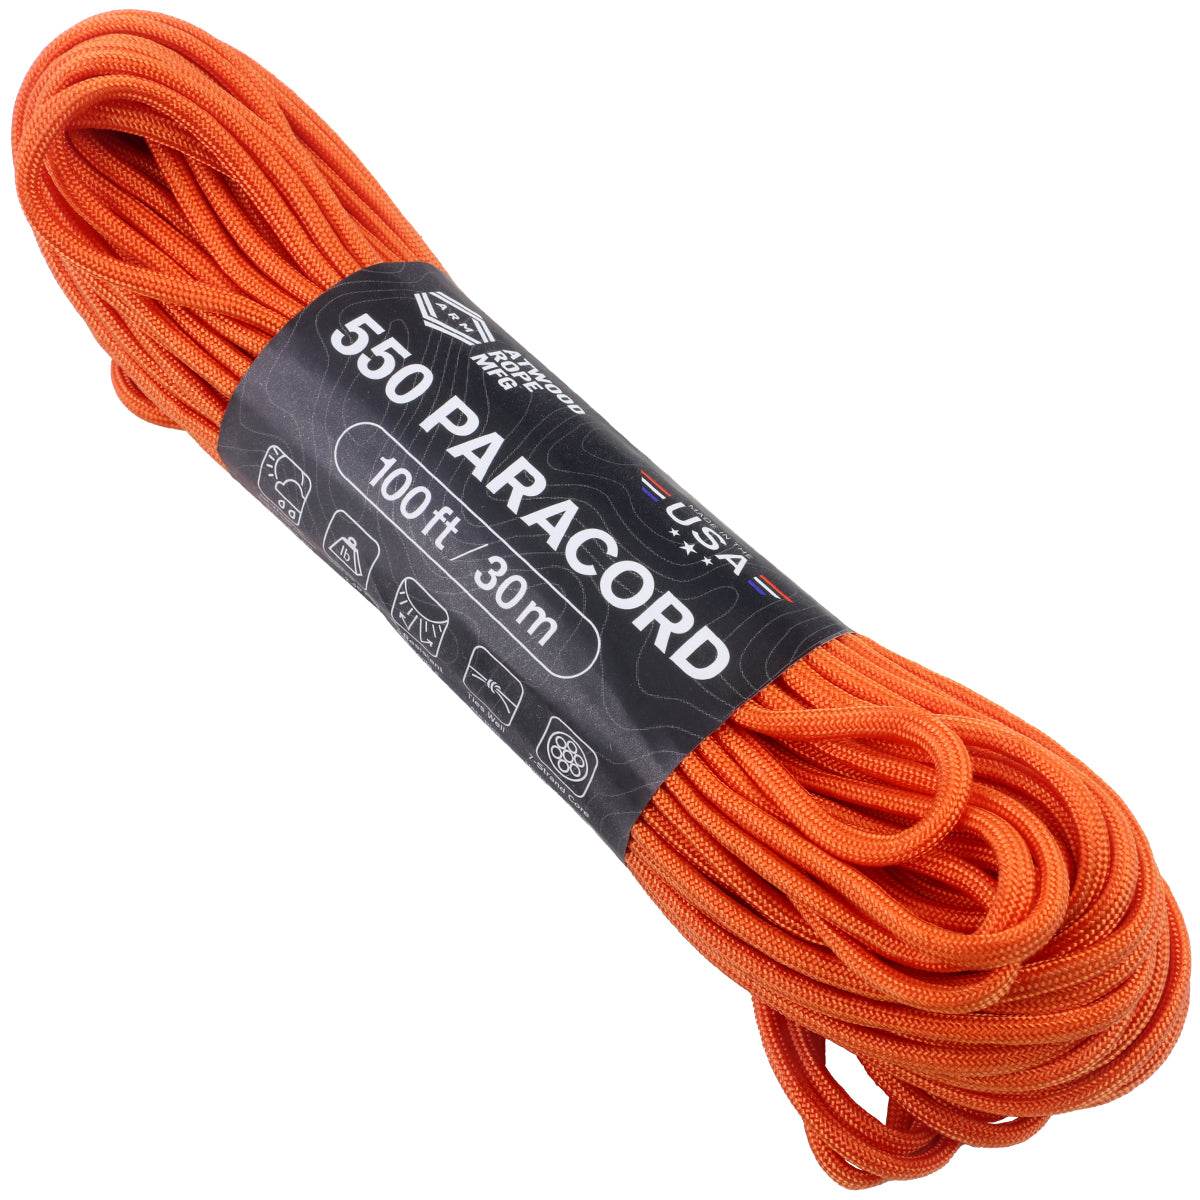 Atwood Rope MFG Color Changing 550 Paracord 100 Feet 7-Strand Core Nylon  Parachute Cord Outside Survival Gear Made in USA | Lanyards, Bracelets